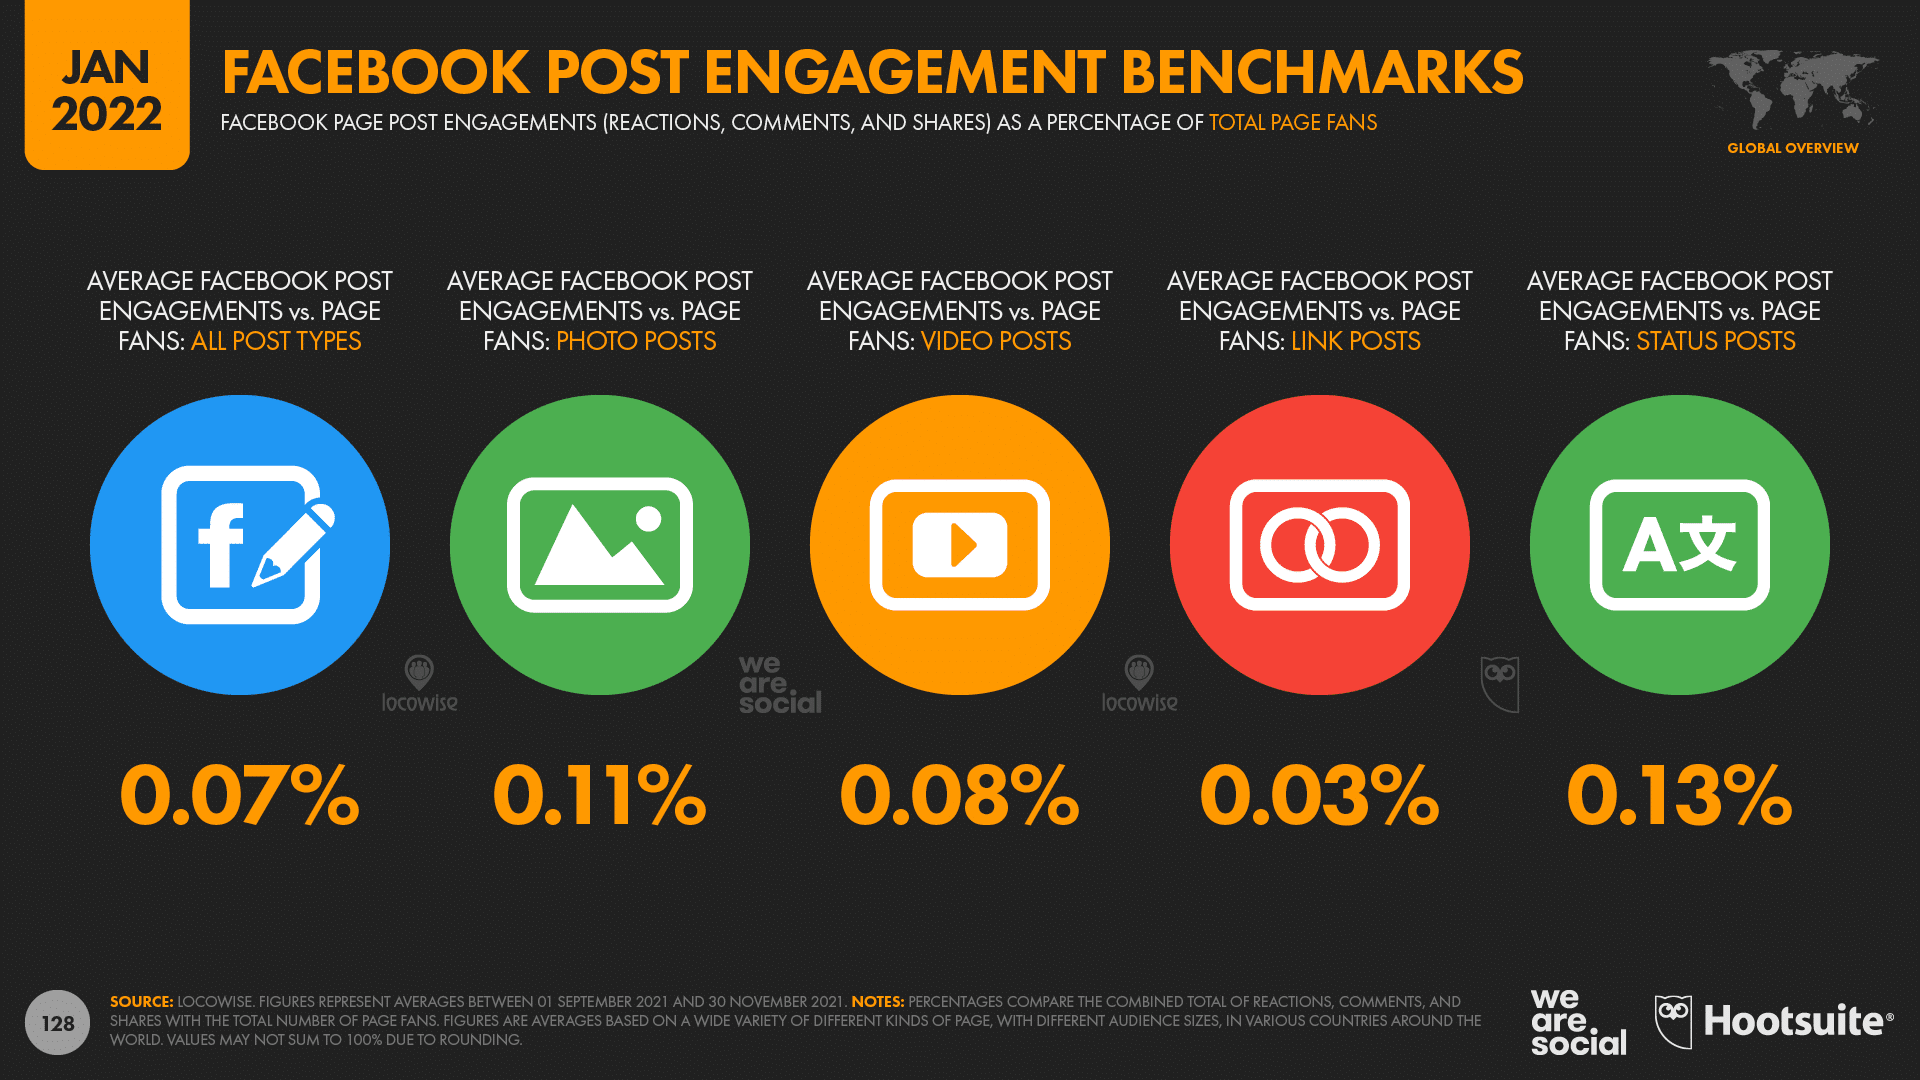 chart showing Facebook Post Engagement Benchmarks